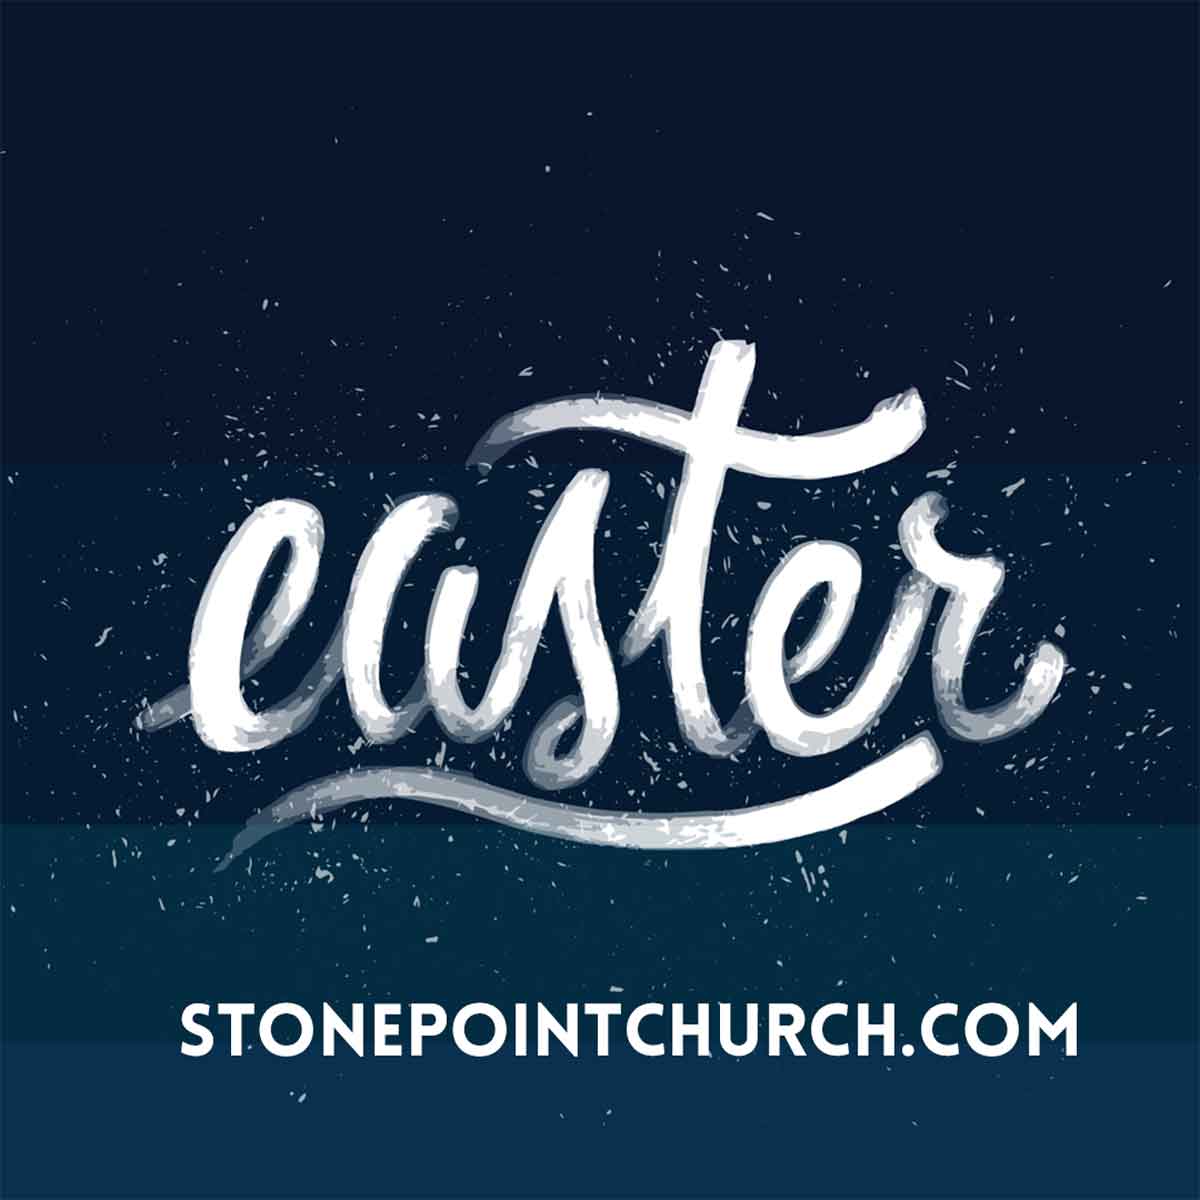 Easter Service 2018